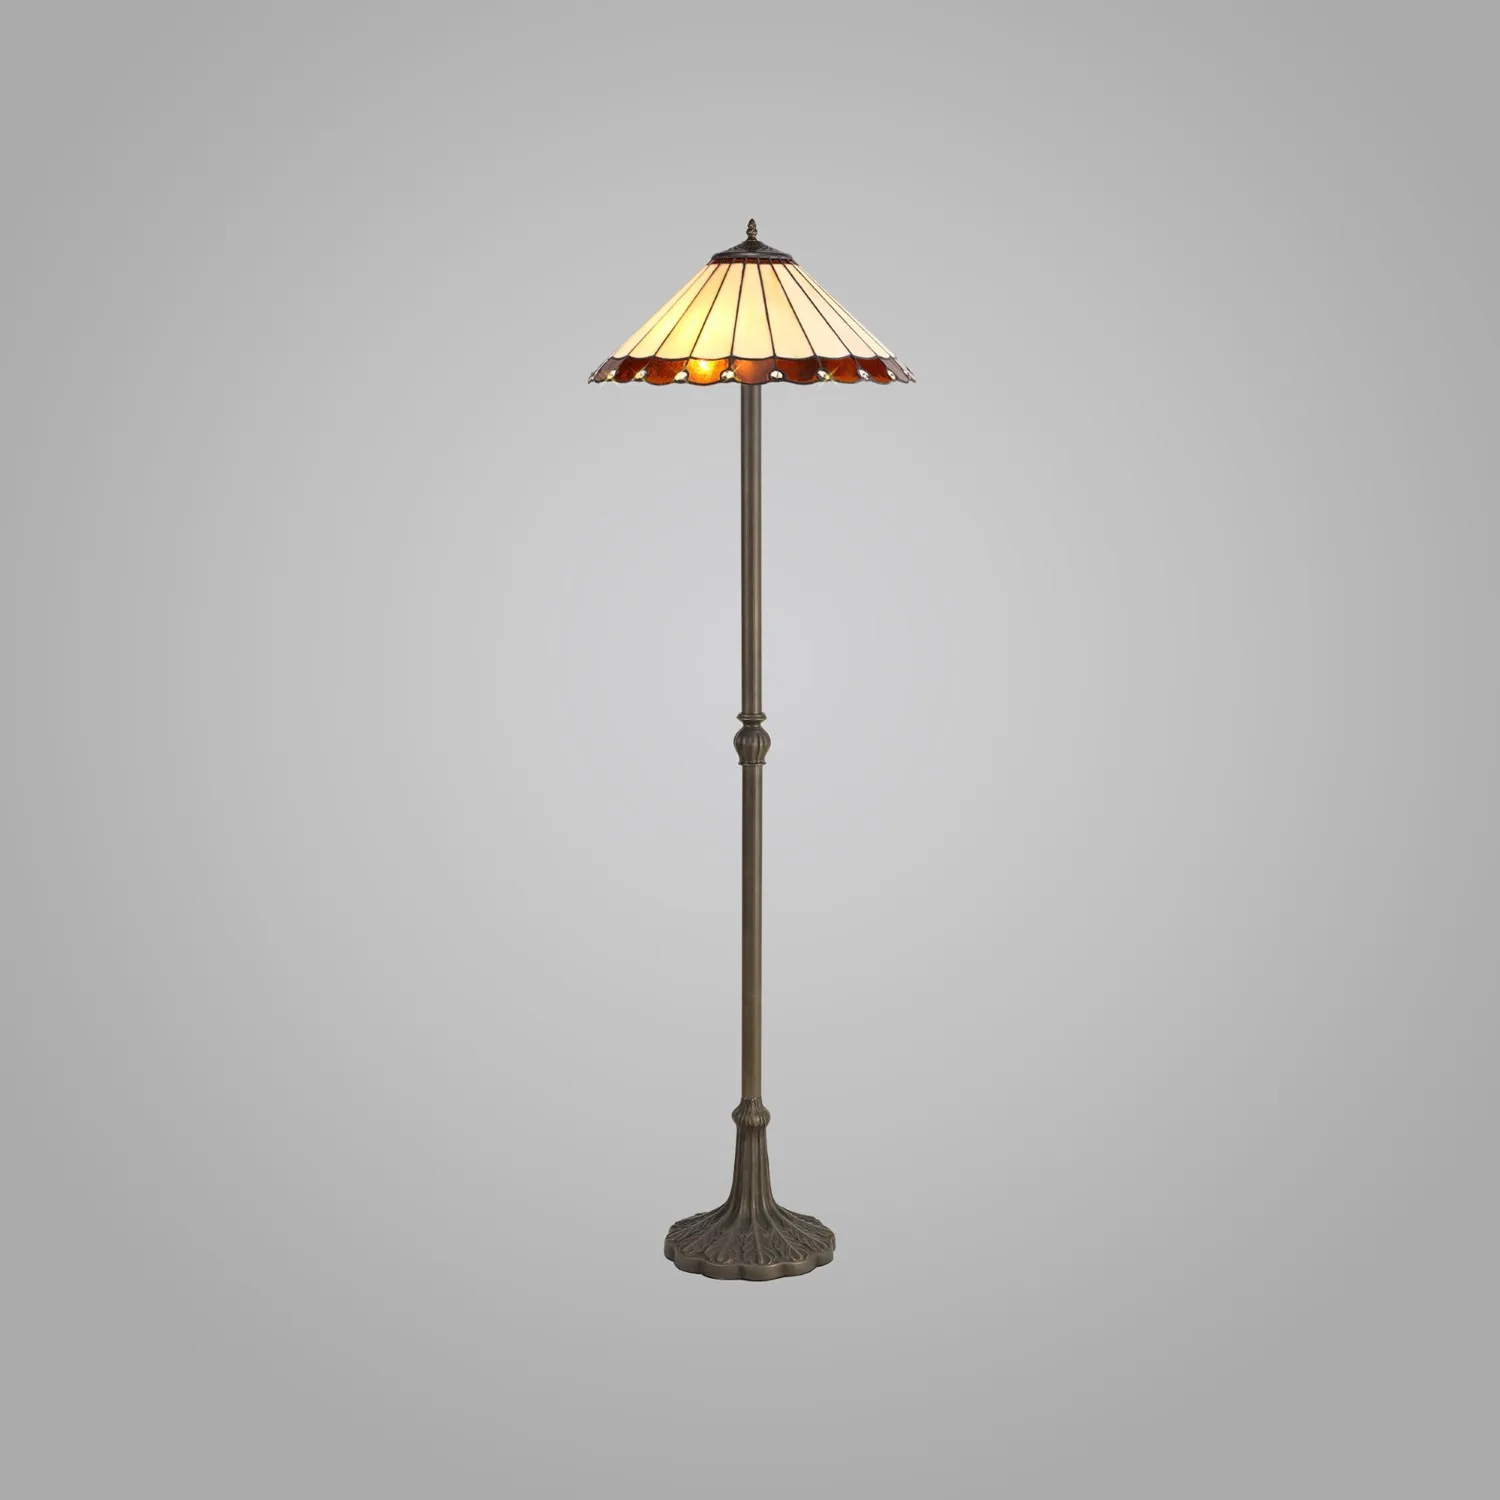 Ware 2 Light Leaf Design Floor Lamp E27 With 40cm Tiffany Shade, Amber Cream Crystal Aged Antique Brass